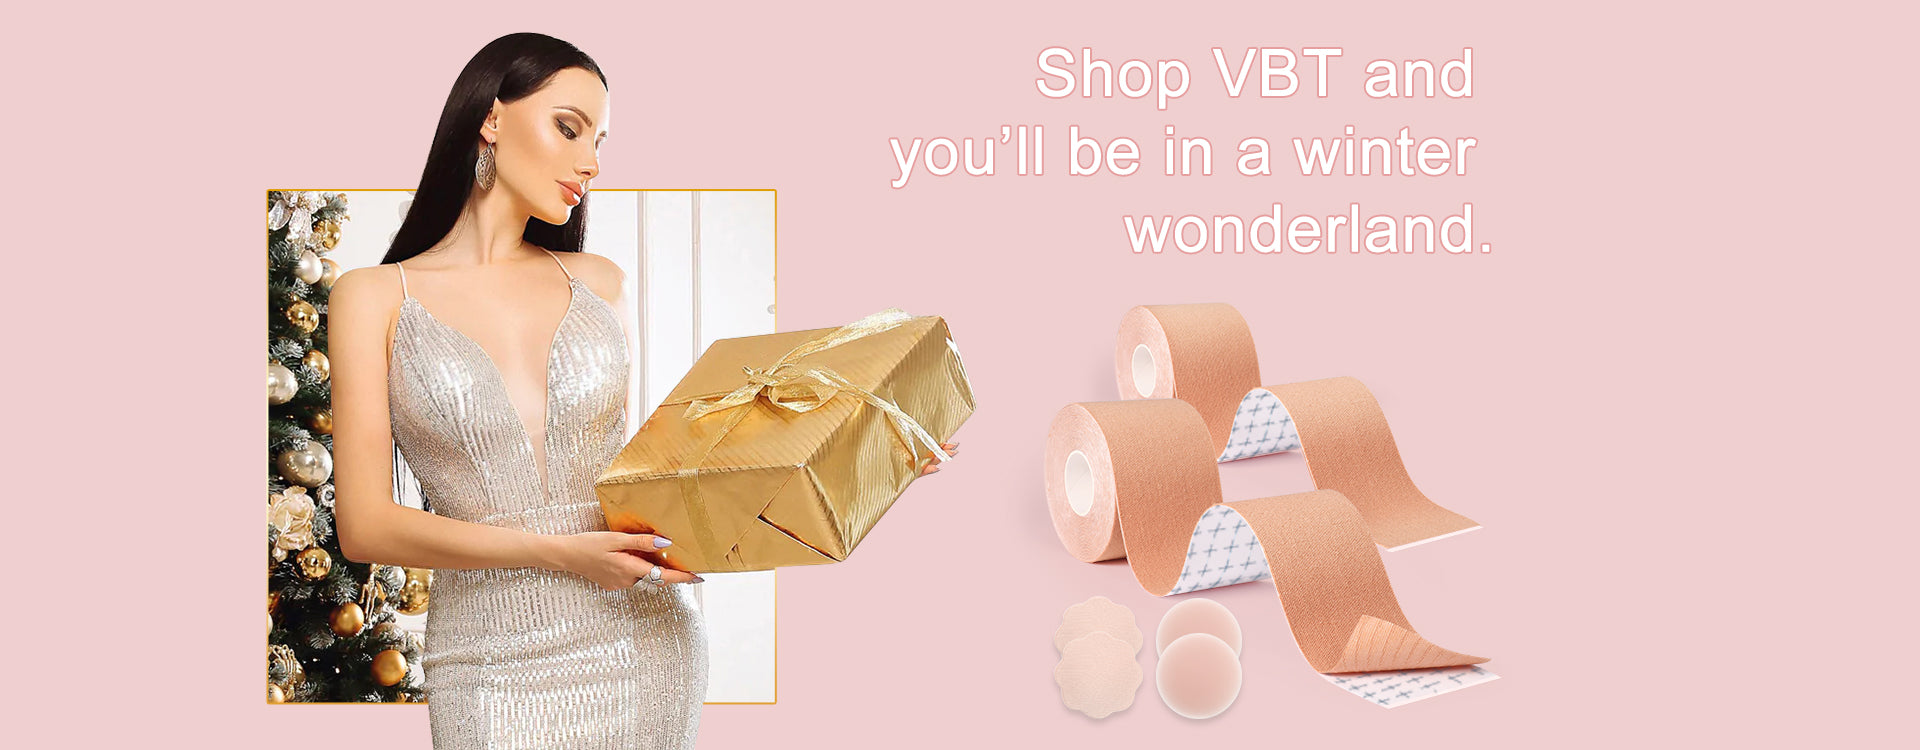 VBT 2 Pack Boob Tape - Breast Lift Tape, Body Tape for Breast Lift w 2 Pcs  Silicone Breast Reusable Adhesive Bra& 2 Pcs Fabric Nipple Covers, Bob Tape